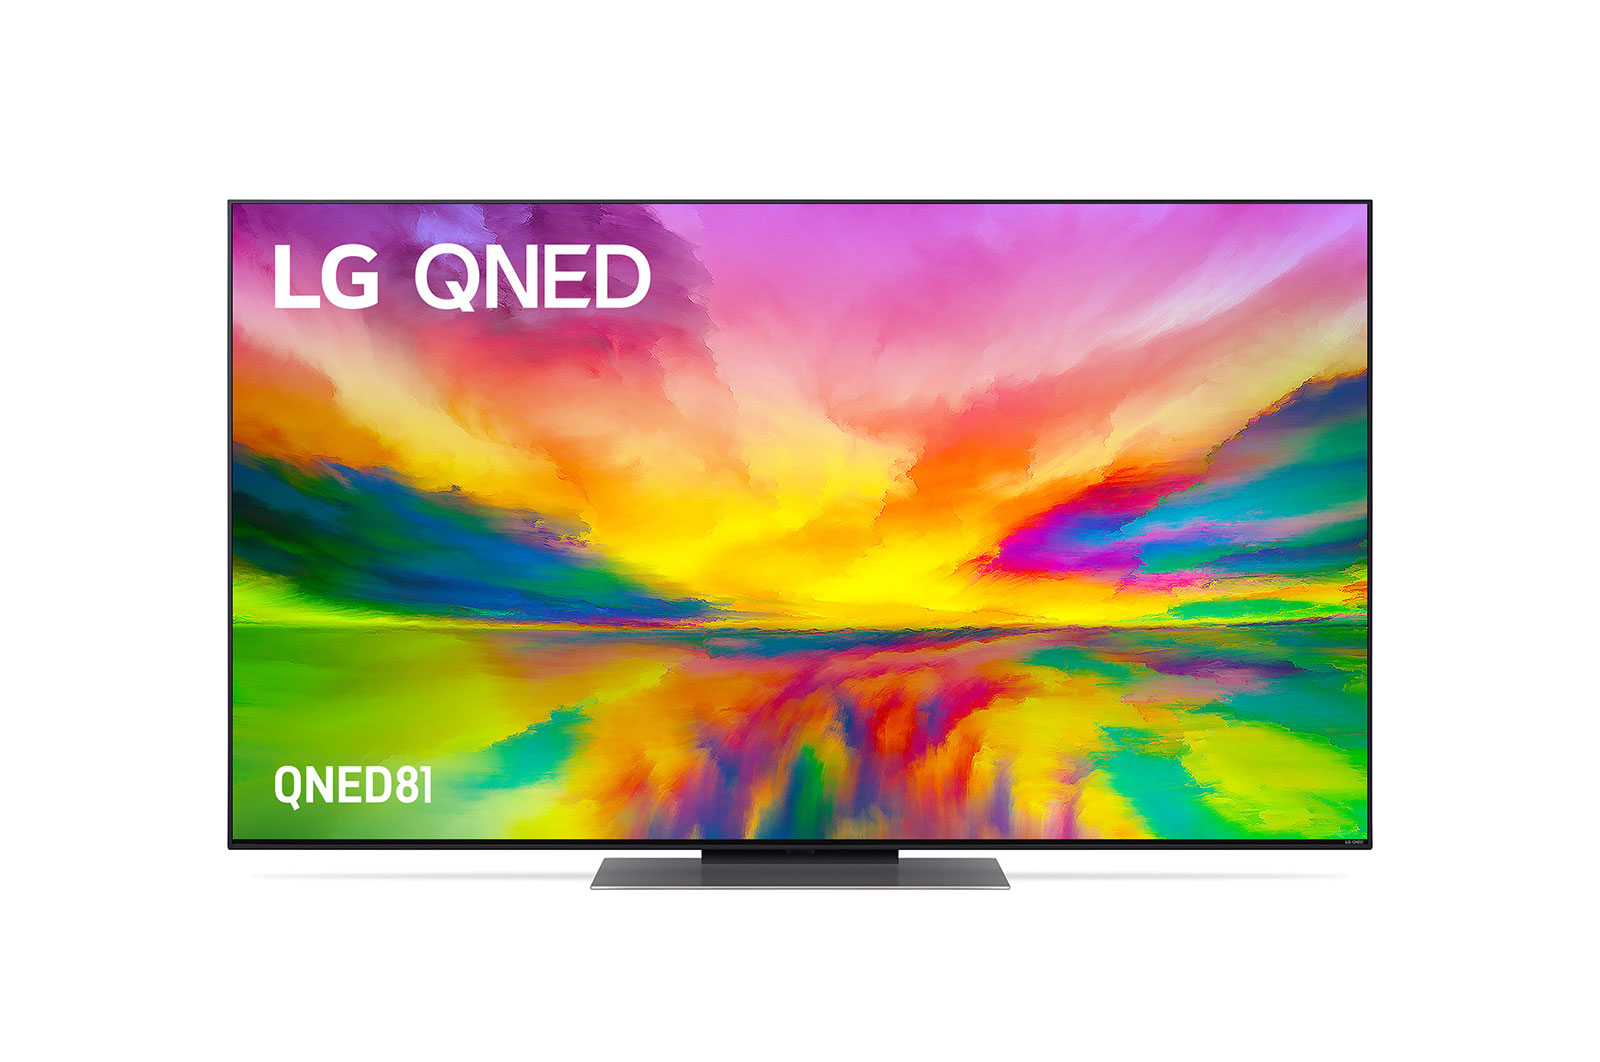 LG QNED81 55 inch 4K Smart QNED TV with Quantum Dot NanoCell | LG 